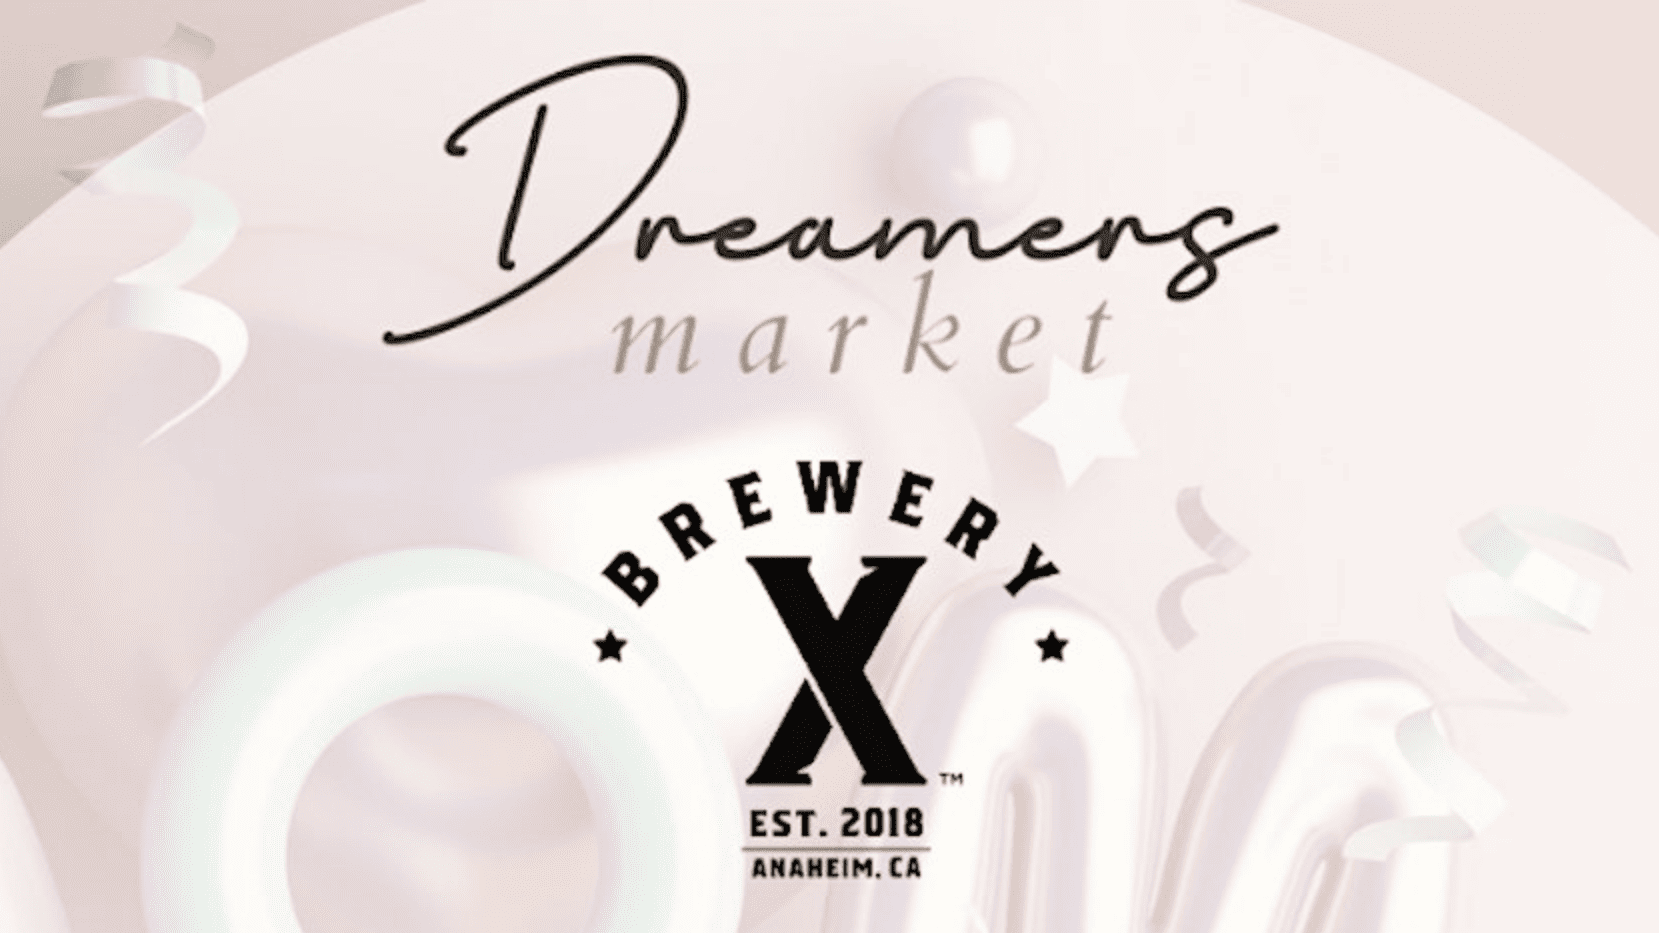 Dreamers market brewery x.